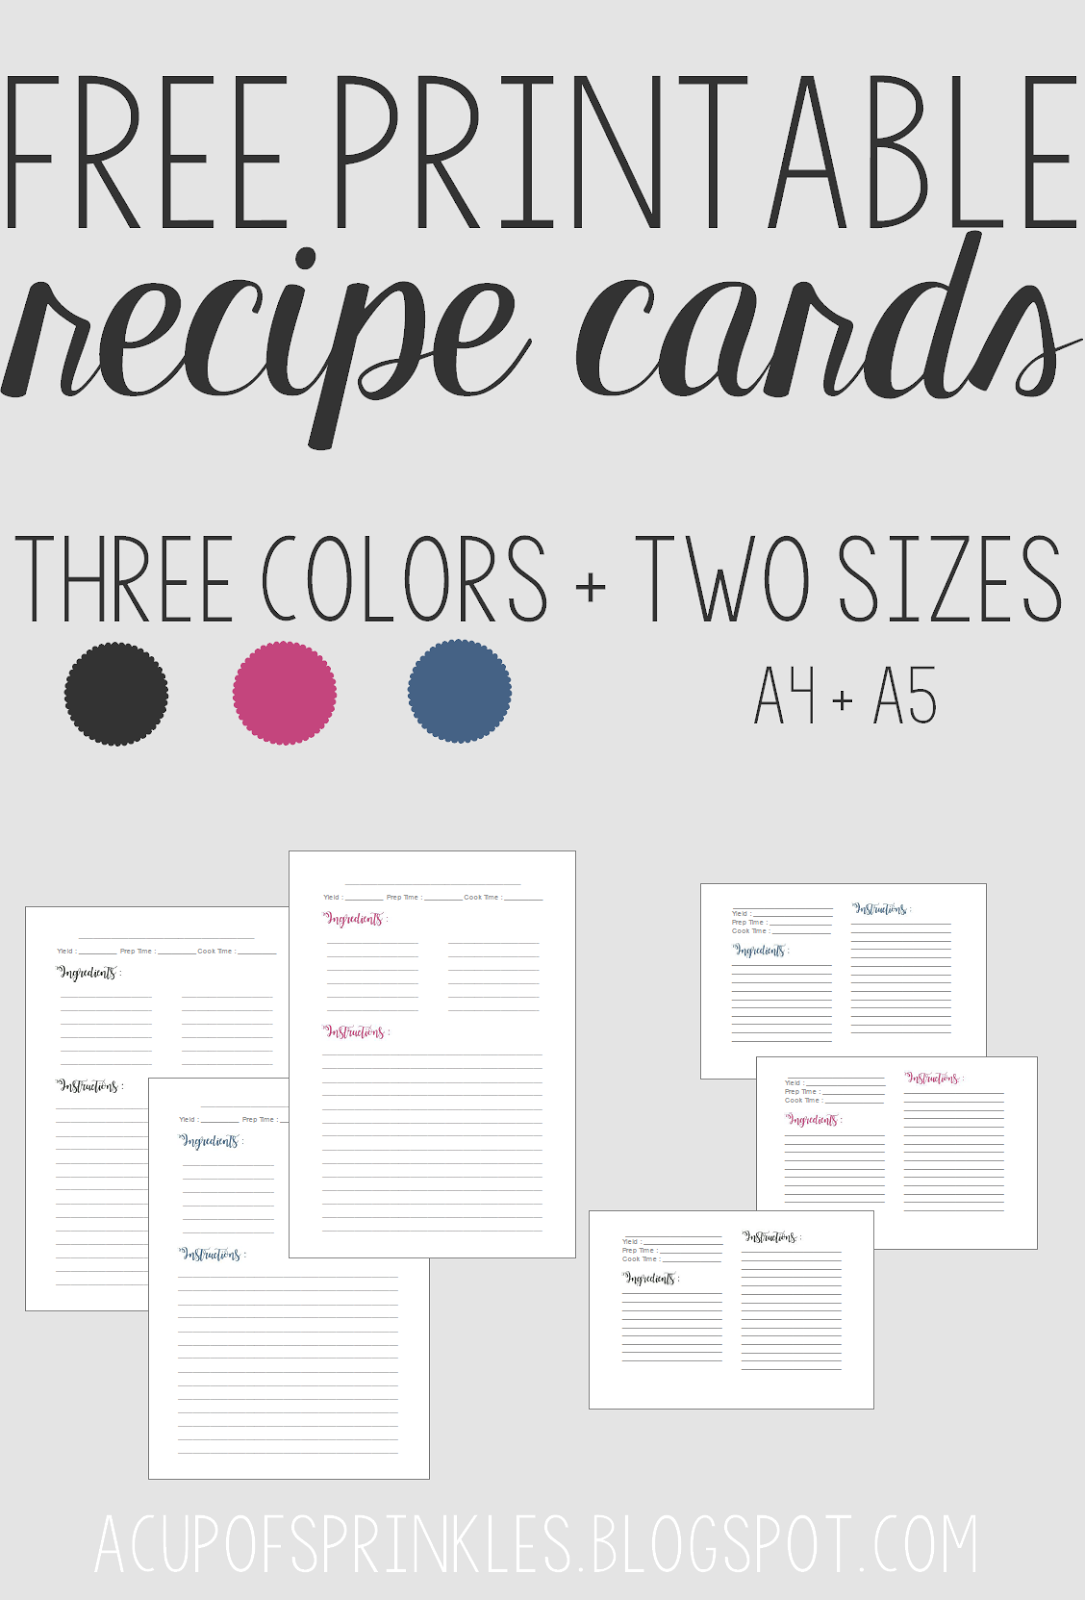 free-printable-recipe-cards-a-cup-of-sprinkles-recipes-from-my